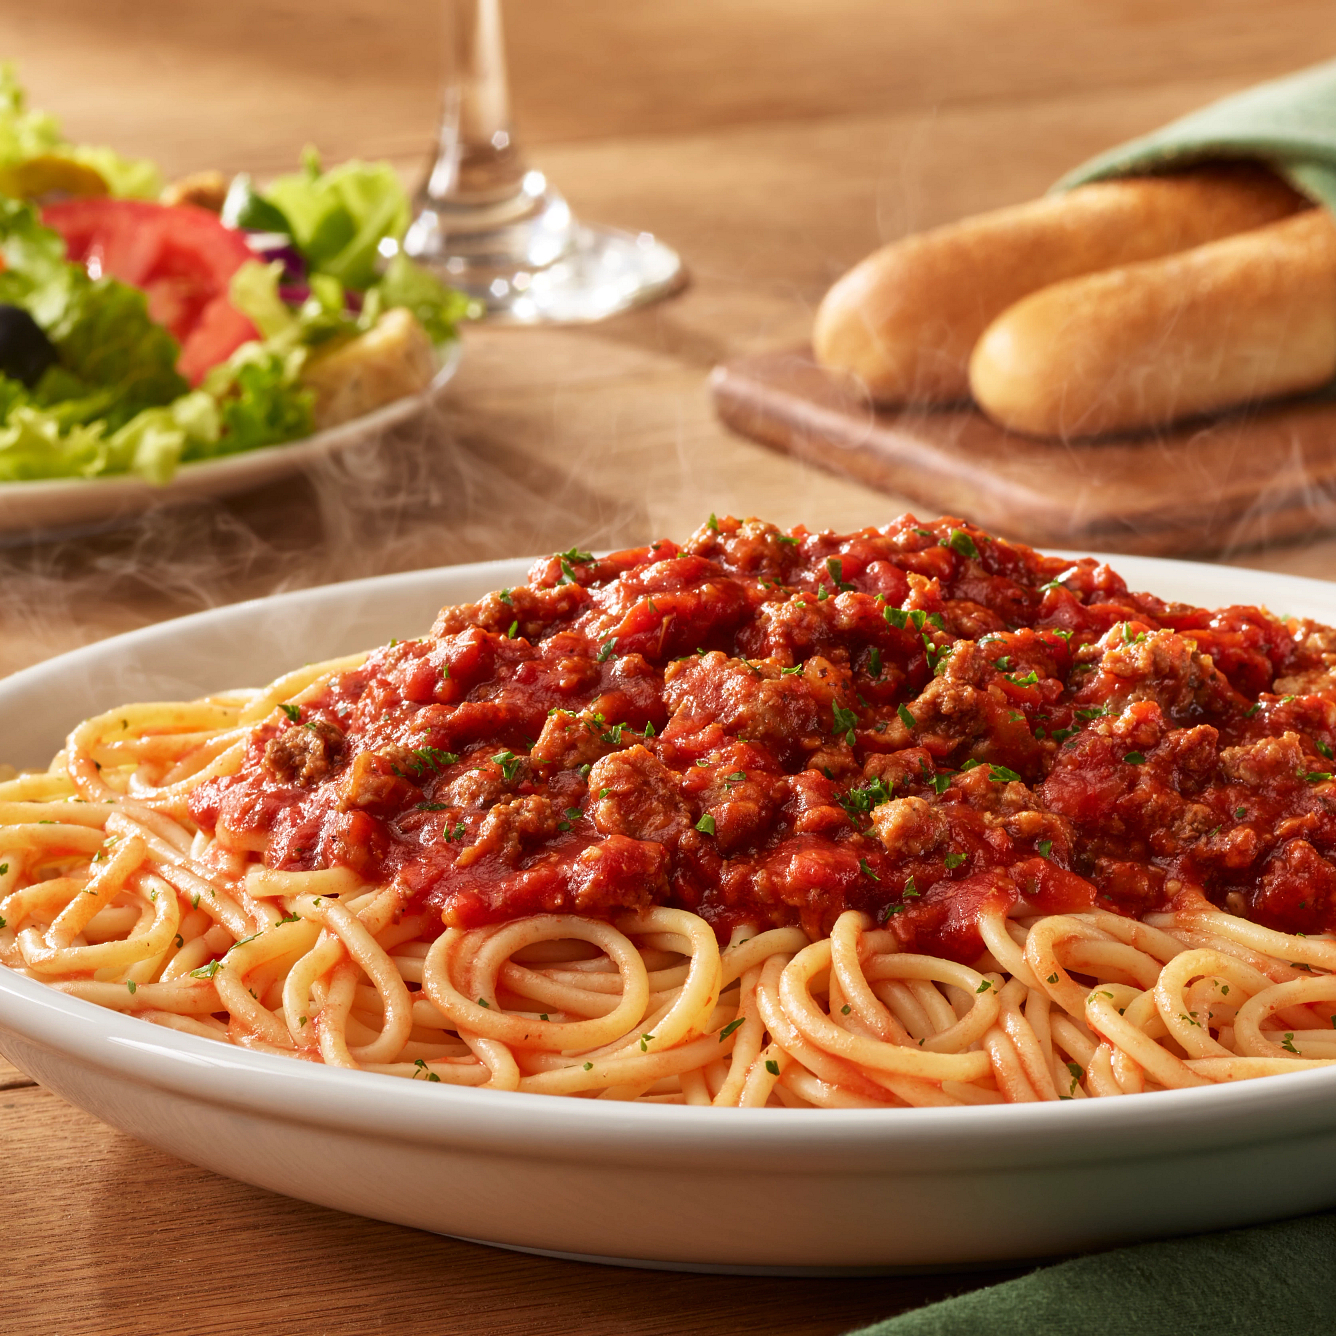 Spaghetti: Topped with your choice of homemade marinara or meat sauce prepared fresh daily. Olive Garden Italian Restaurant Dearborn (313)240-6100